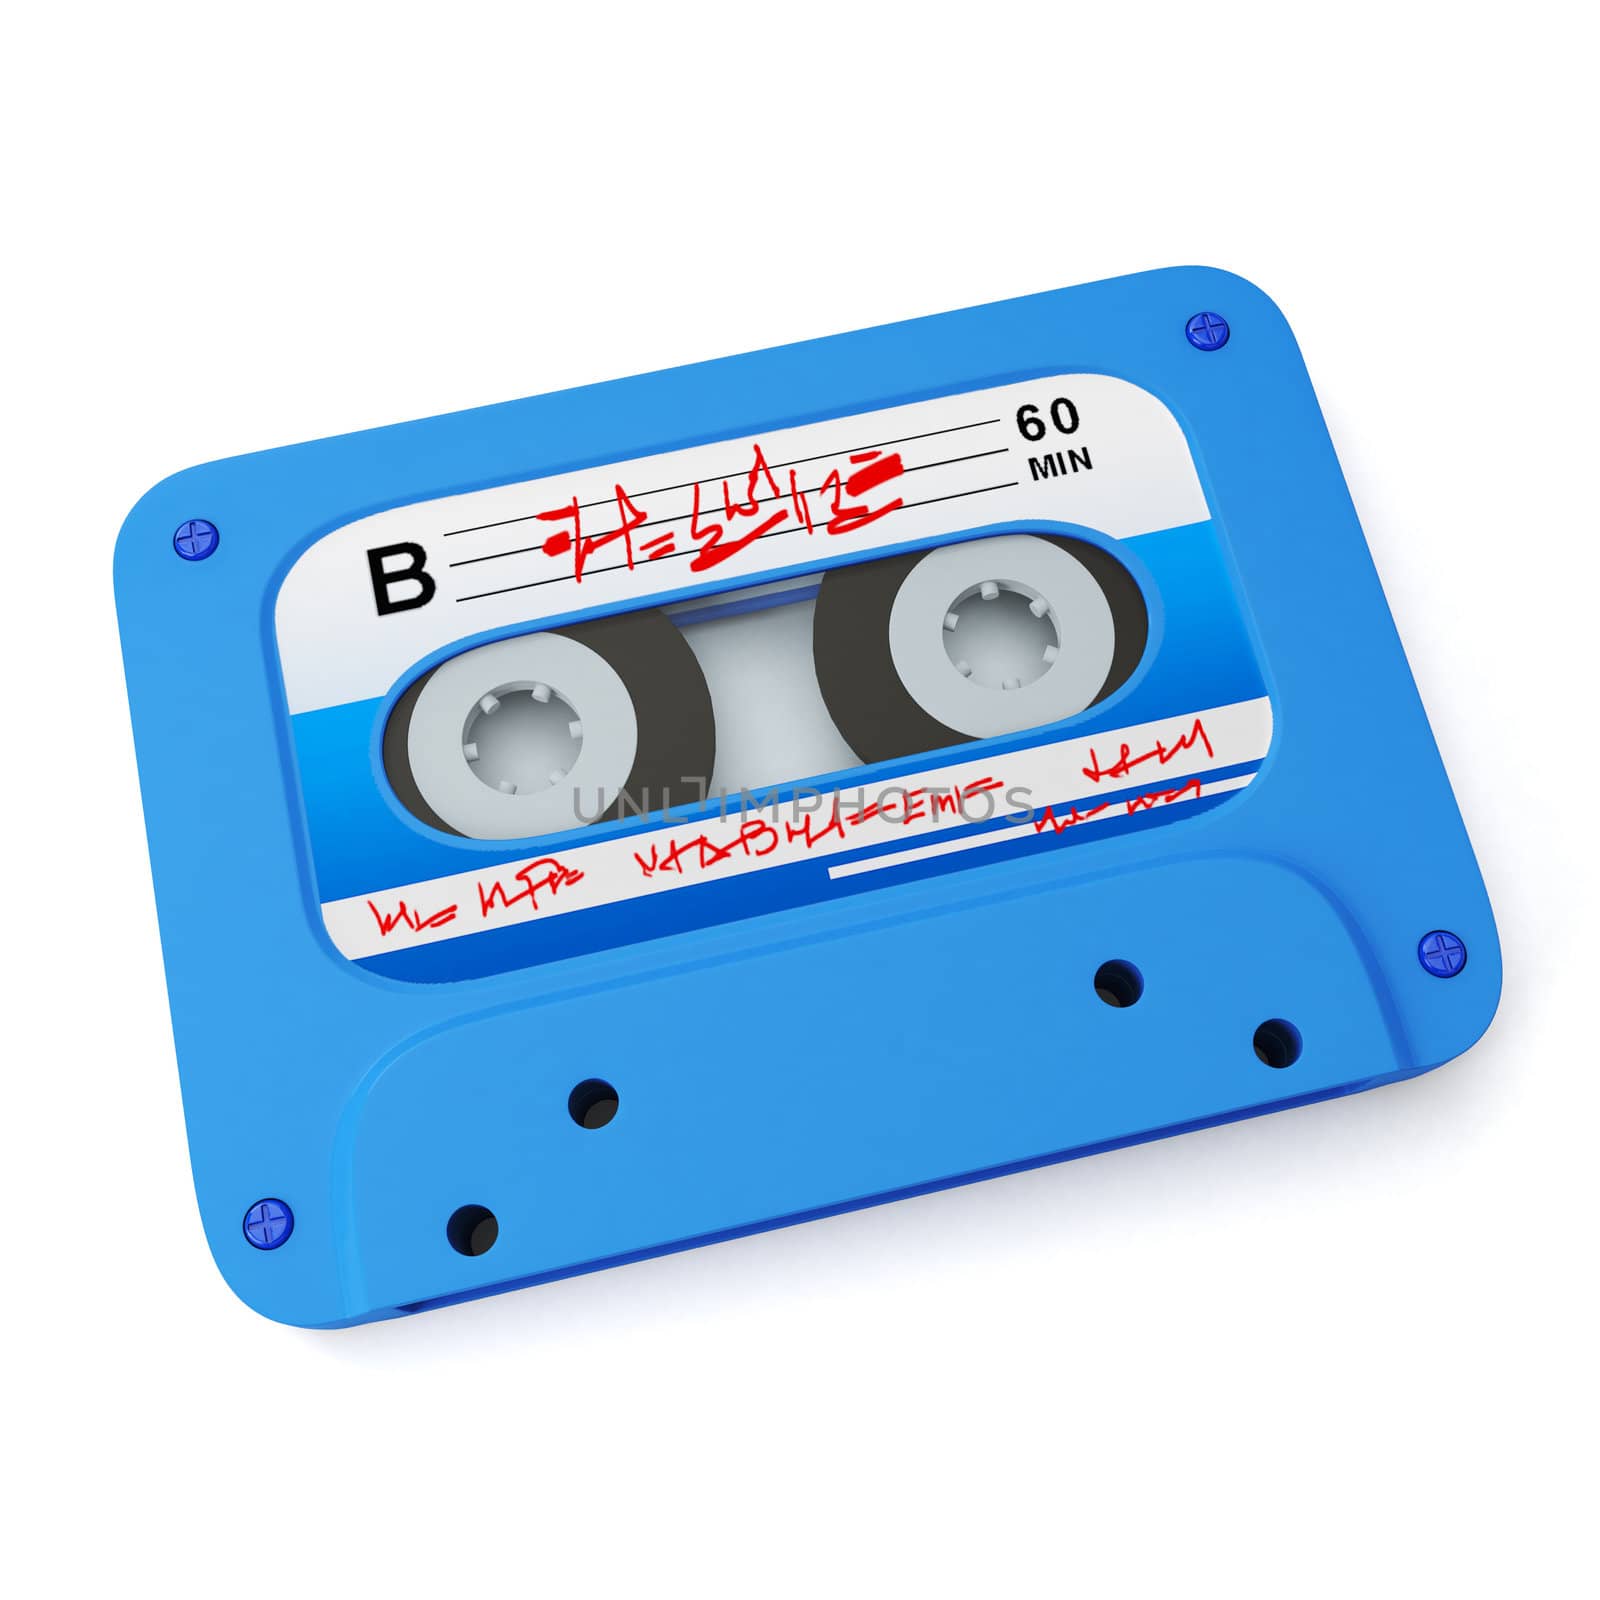 Music cassettes in blue on a white background, graphic by kolobsek